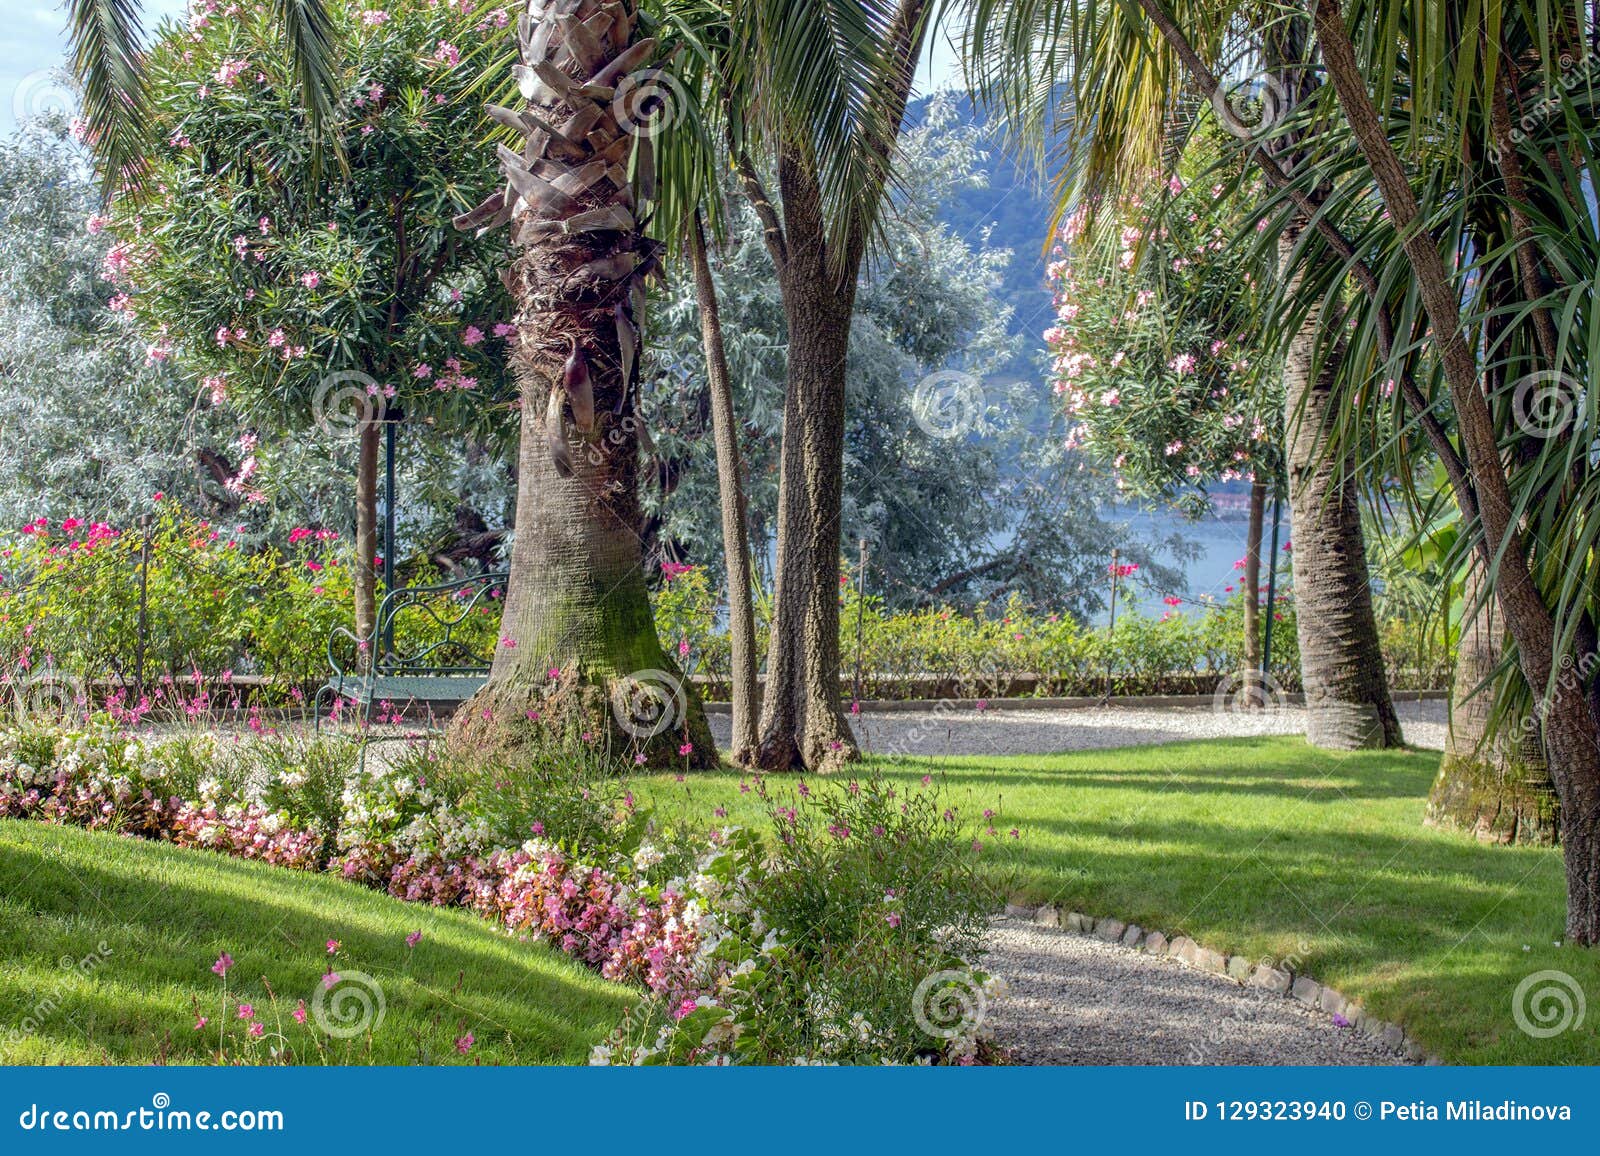 The Gardens Of Isola Madre Mother Island Lake Maggiore Northern